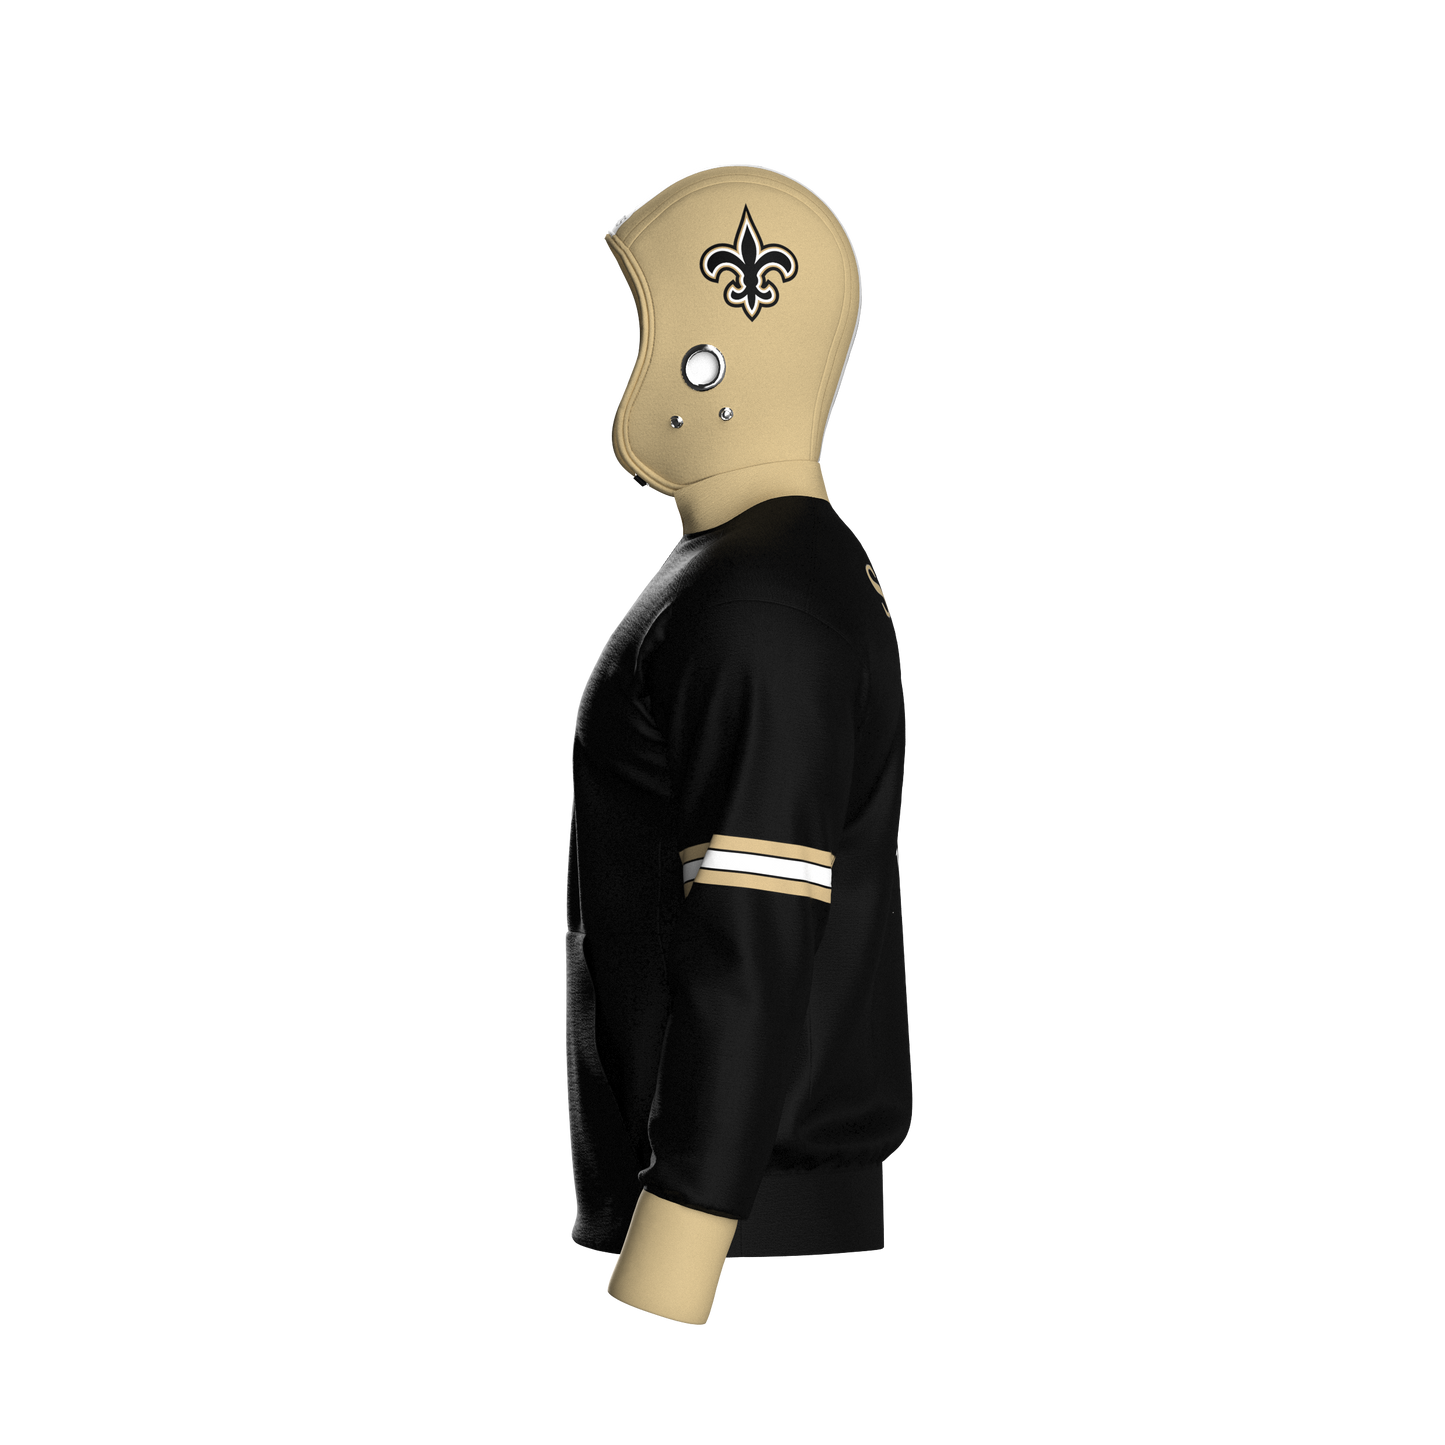 New Orleans Saints Home Pullover (youth)